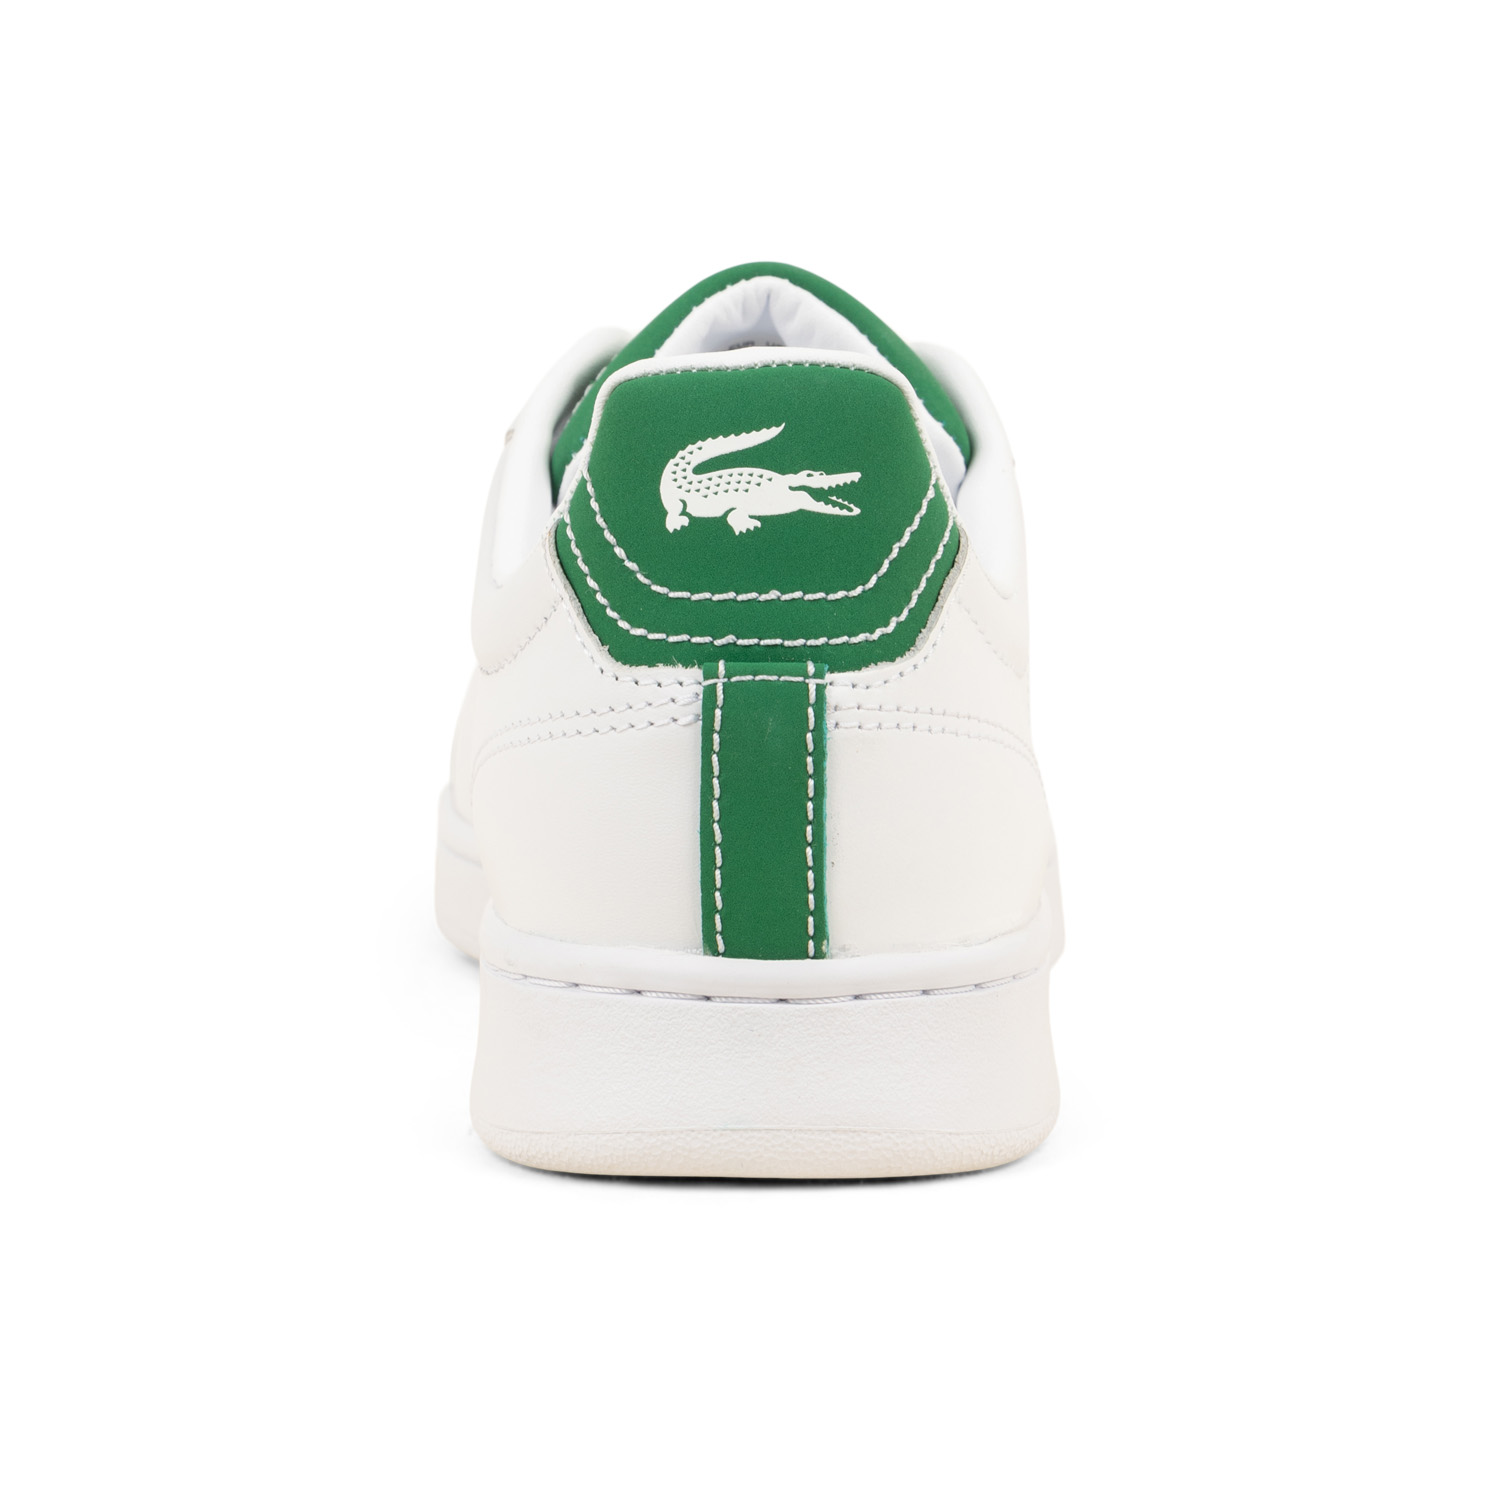 03 - CARNABY - LACOSTE - Baskets - Cuir